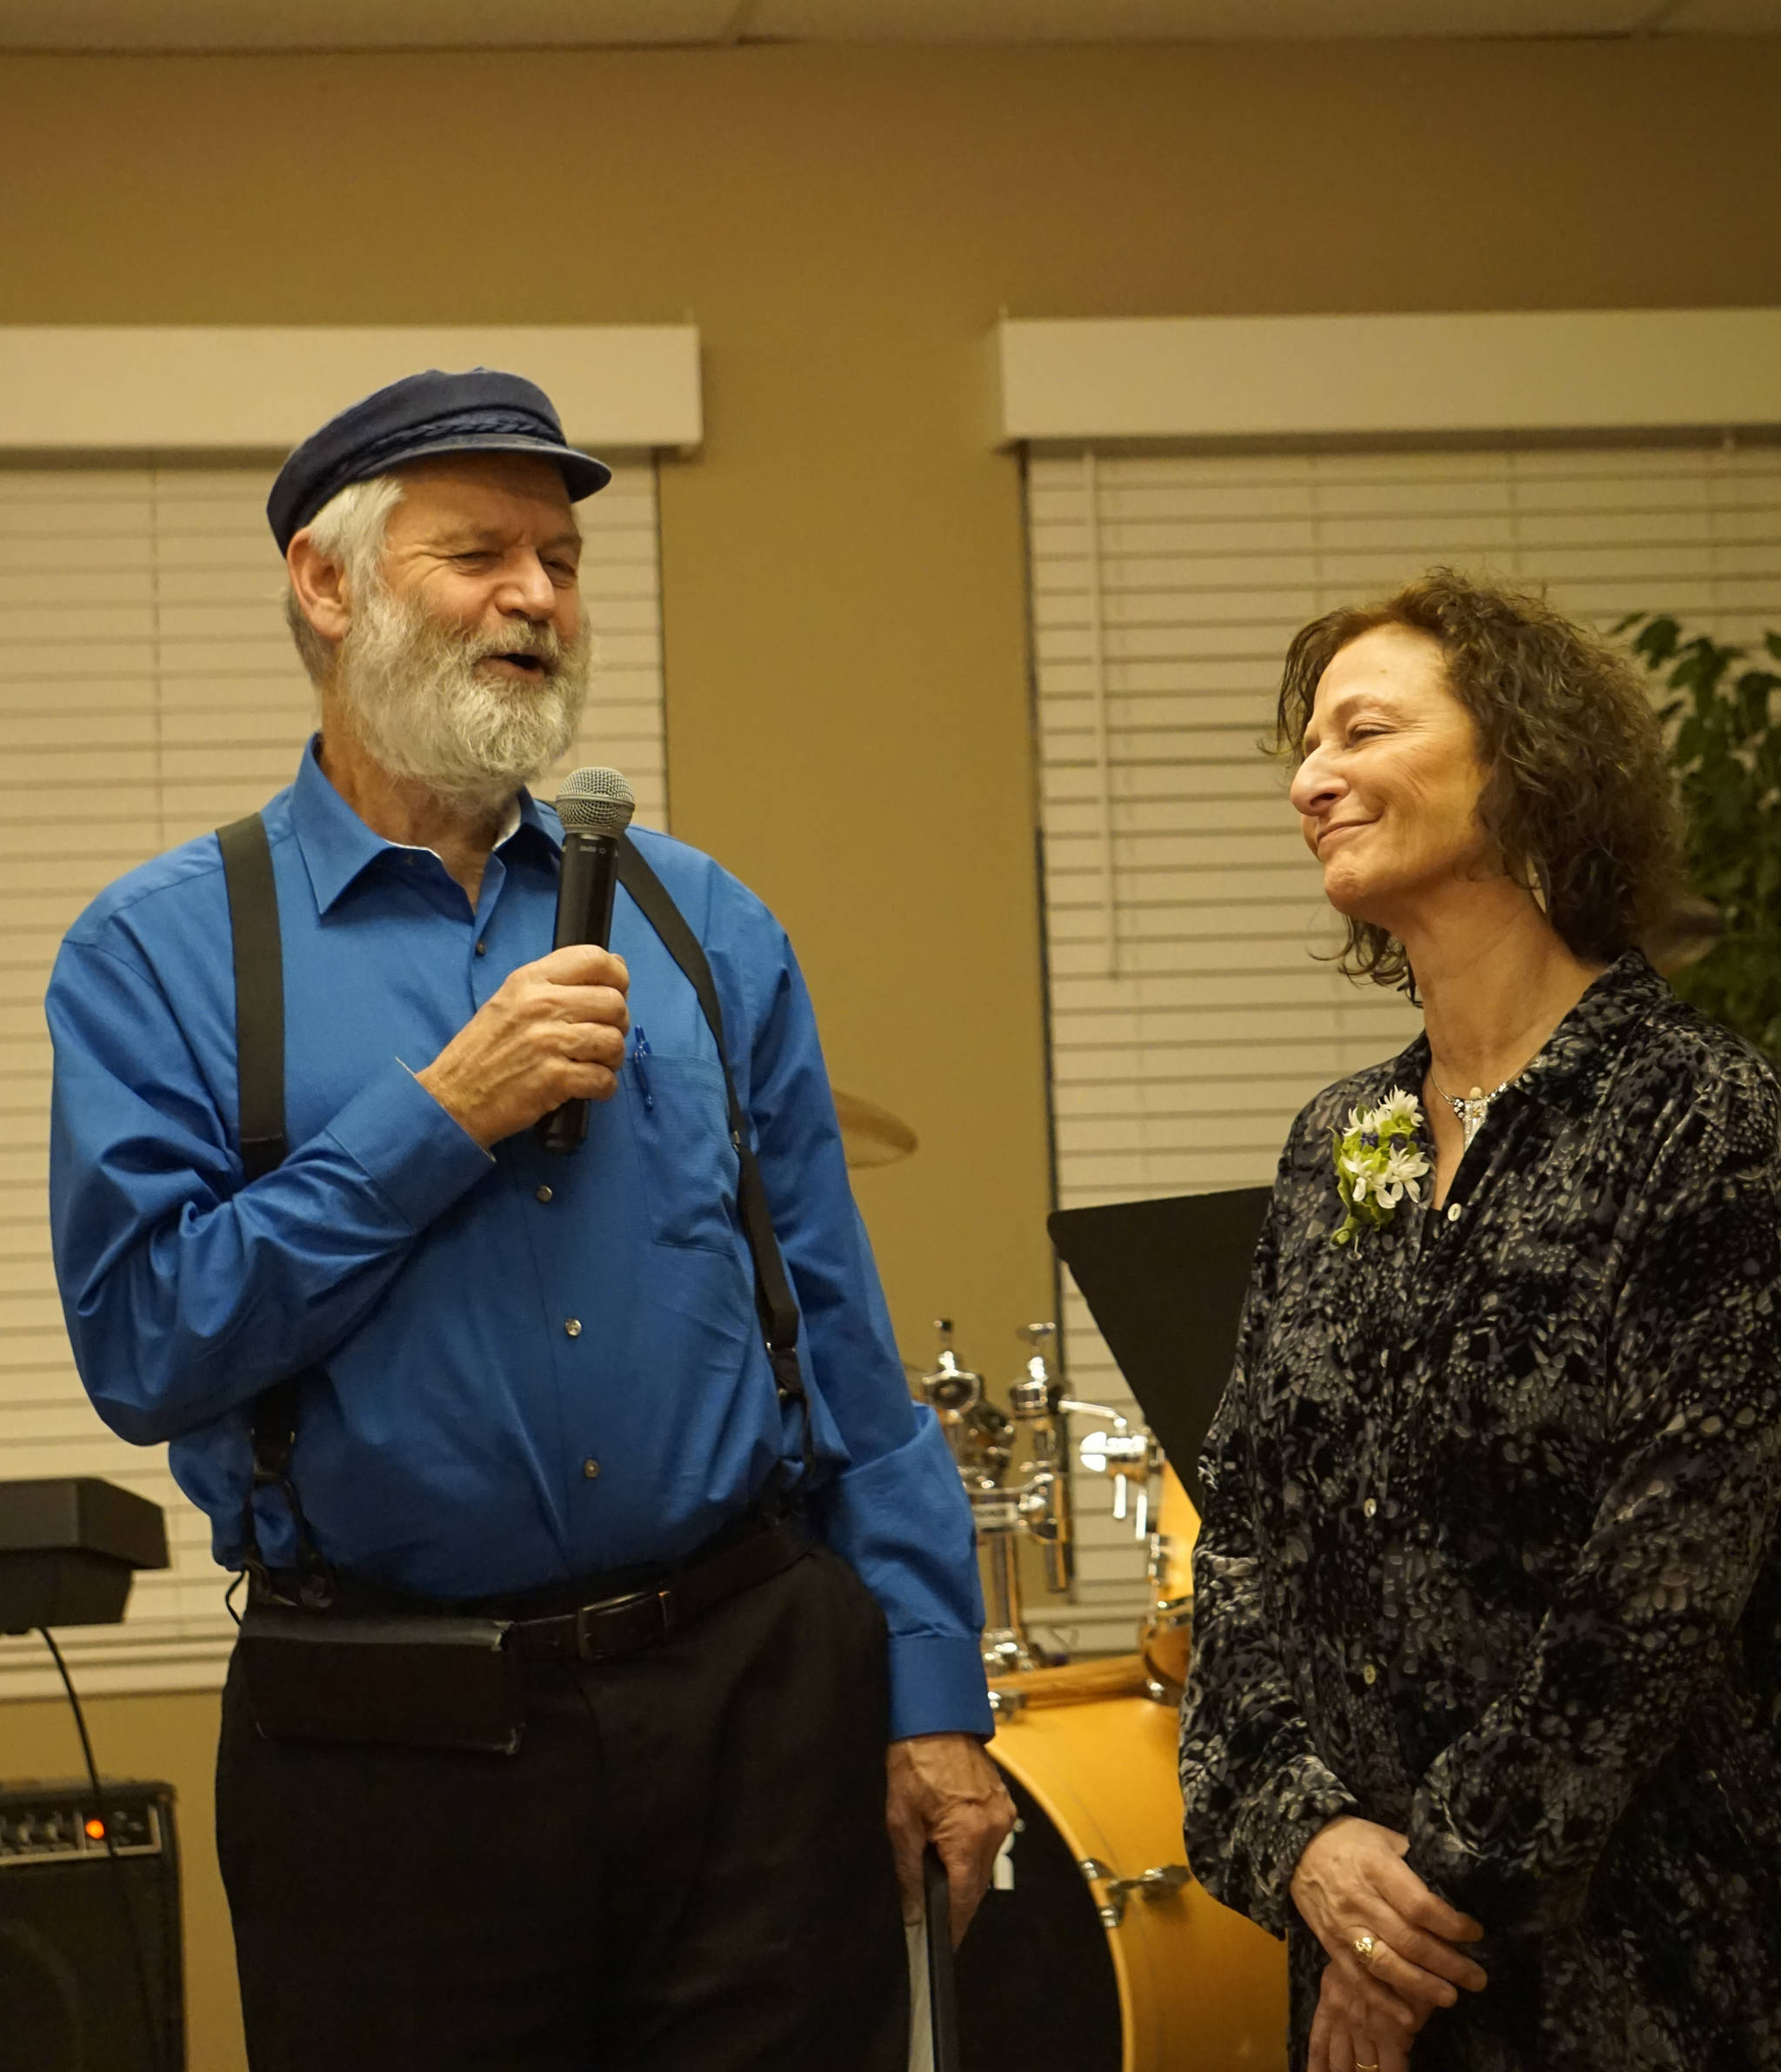 Kachemak Bay Campus Director Carol Swartz, right, smiles as Rep. Paul Seaton, NP-Homer, left, presents her with a Legislative Proclamation at her retirement party Land’s End Resort on Friday, Dec. 14, 2018 in Homer, Alaska. Swartz ends her job as director at the end of the year. Friends joined her in celebrating her tenure as director of the local branch campus of Kenai Peninsula College, University of Alaska Anchorage. (Photo by Michael Armstrong/Homer News)